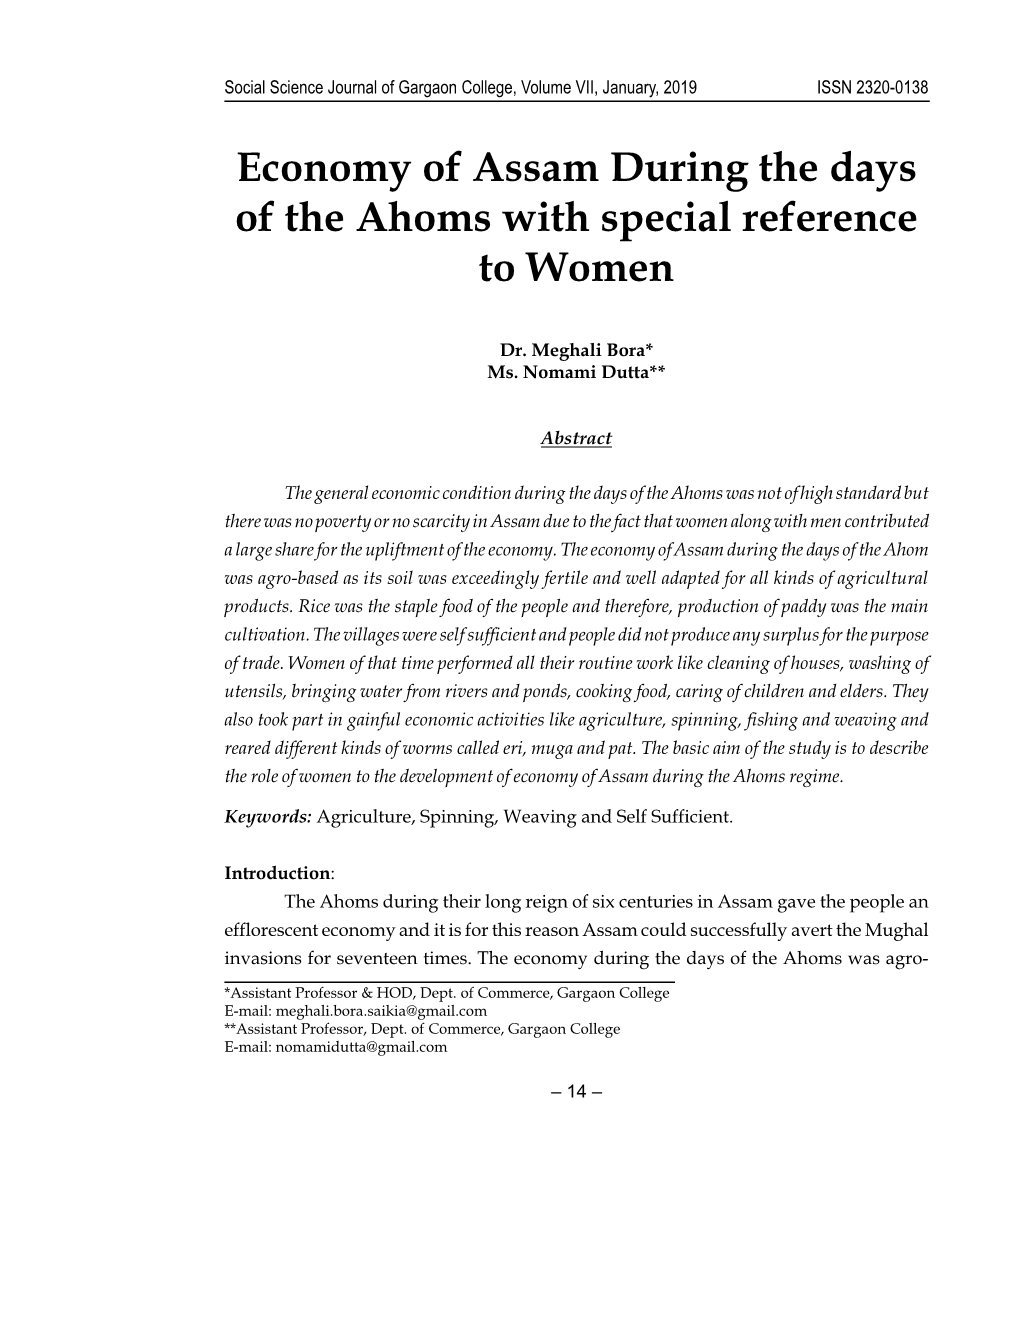 Economy of Assam During the Days of the Ahoms with Special Reference to Women